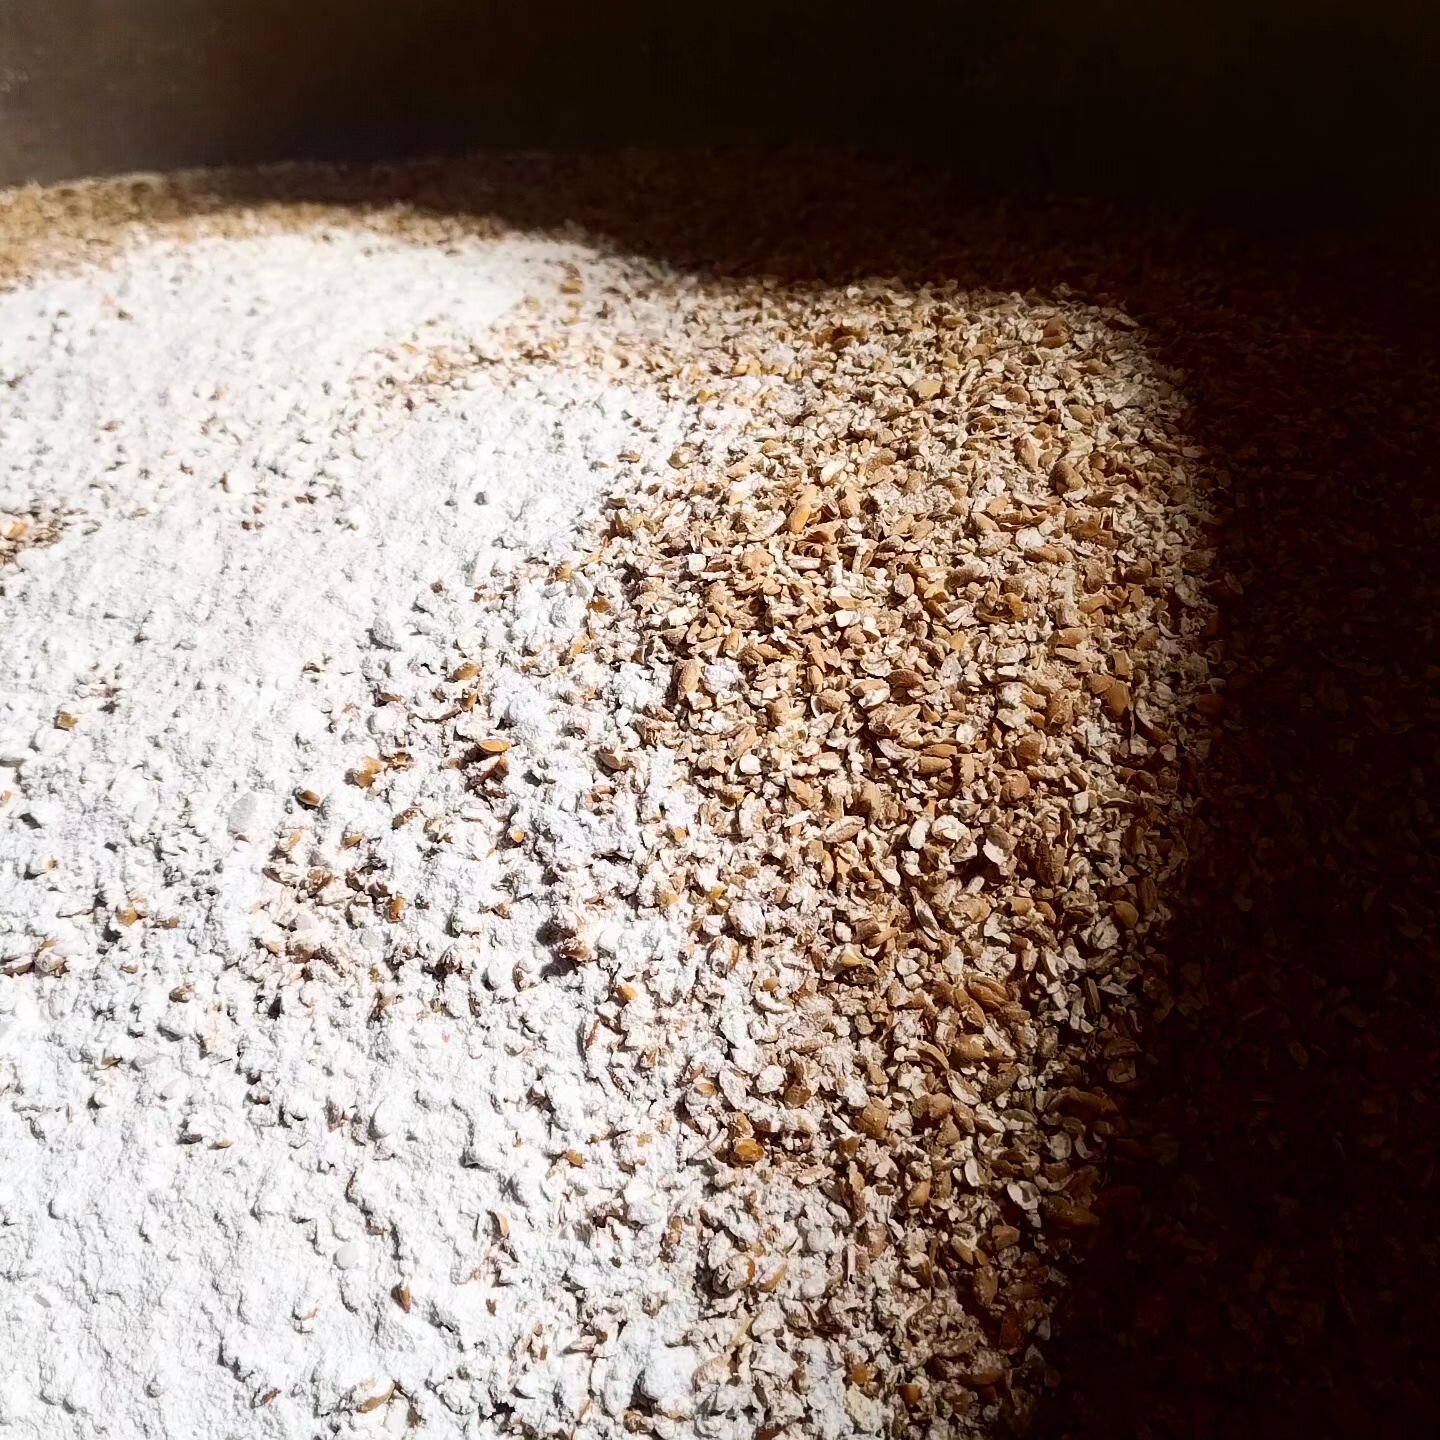 We're prepared to tackle this grain mountain today! 💪⛰️🌾 If things go well, expect to try our first beer in the coming weeks... watch this space! 🌟🍺

.
.
.

#FirstBrew #PaleAle #CraftBeer #BrewingMagic #TasteTheAdventure #ThirstQuencher #BeerLove